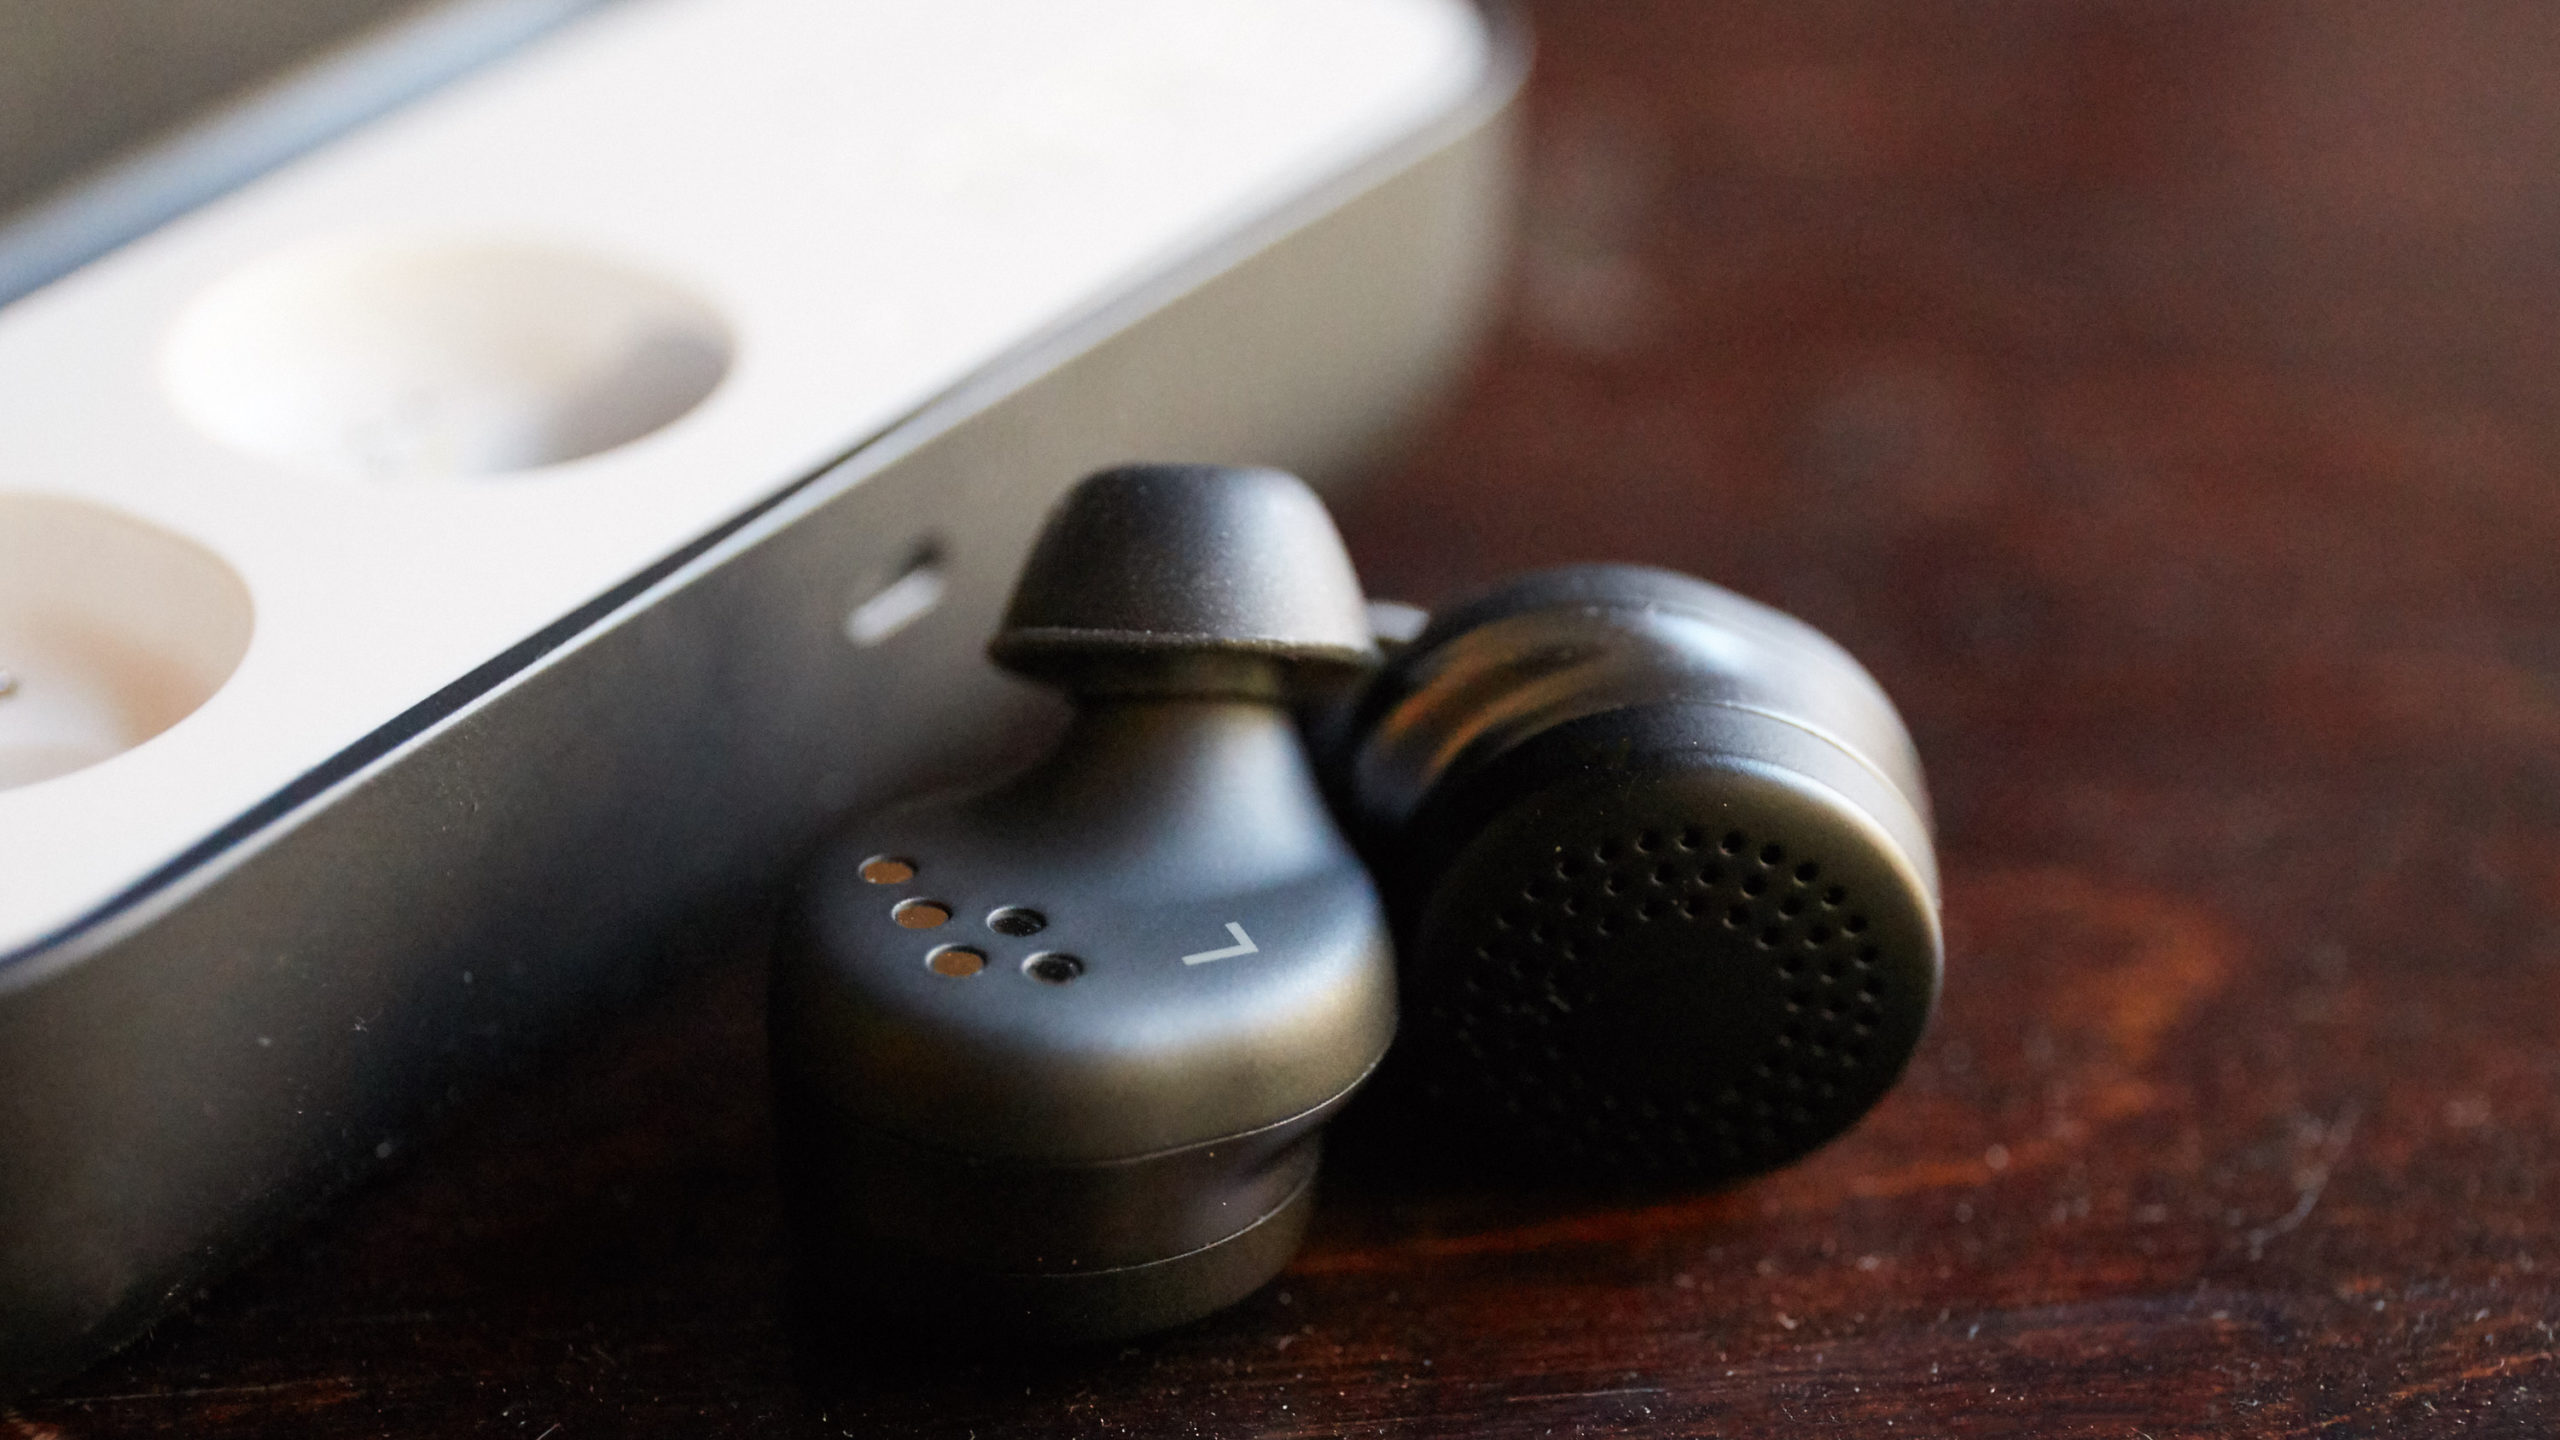 Doppler Labs Here One Wireless Earbuds: The Gizmodo Review